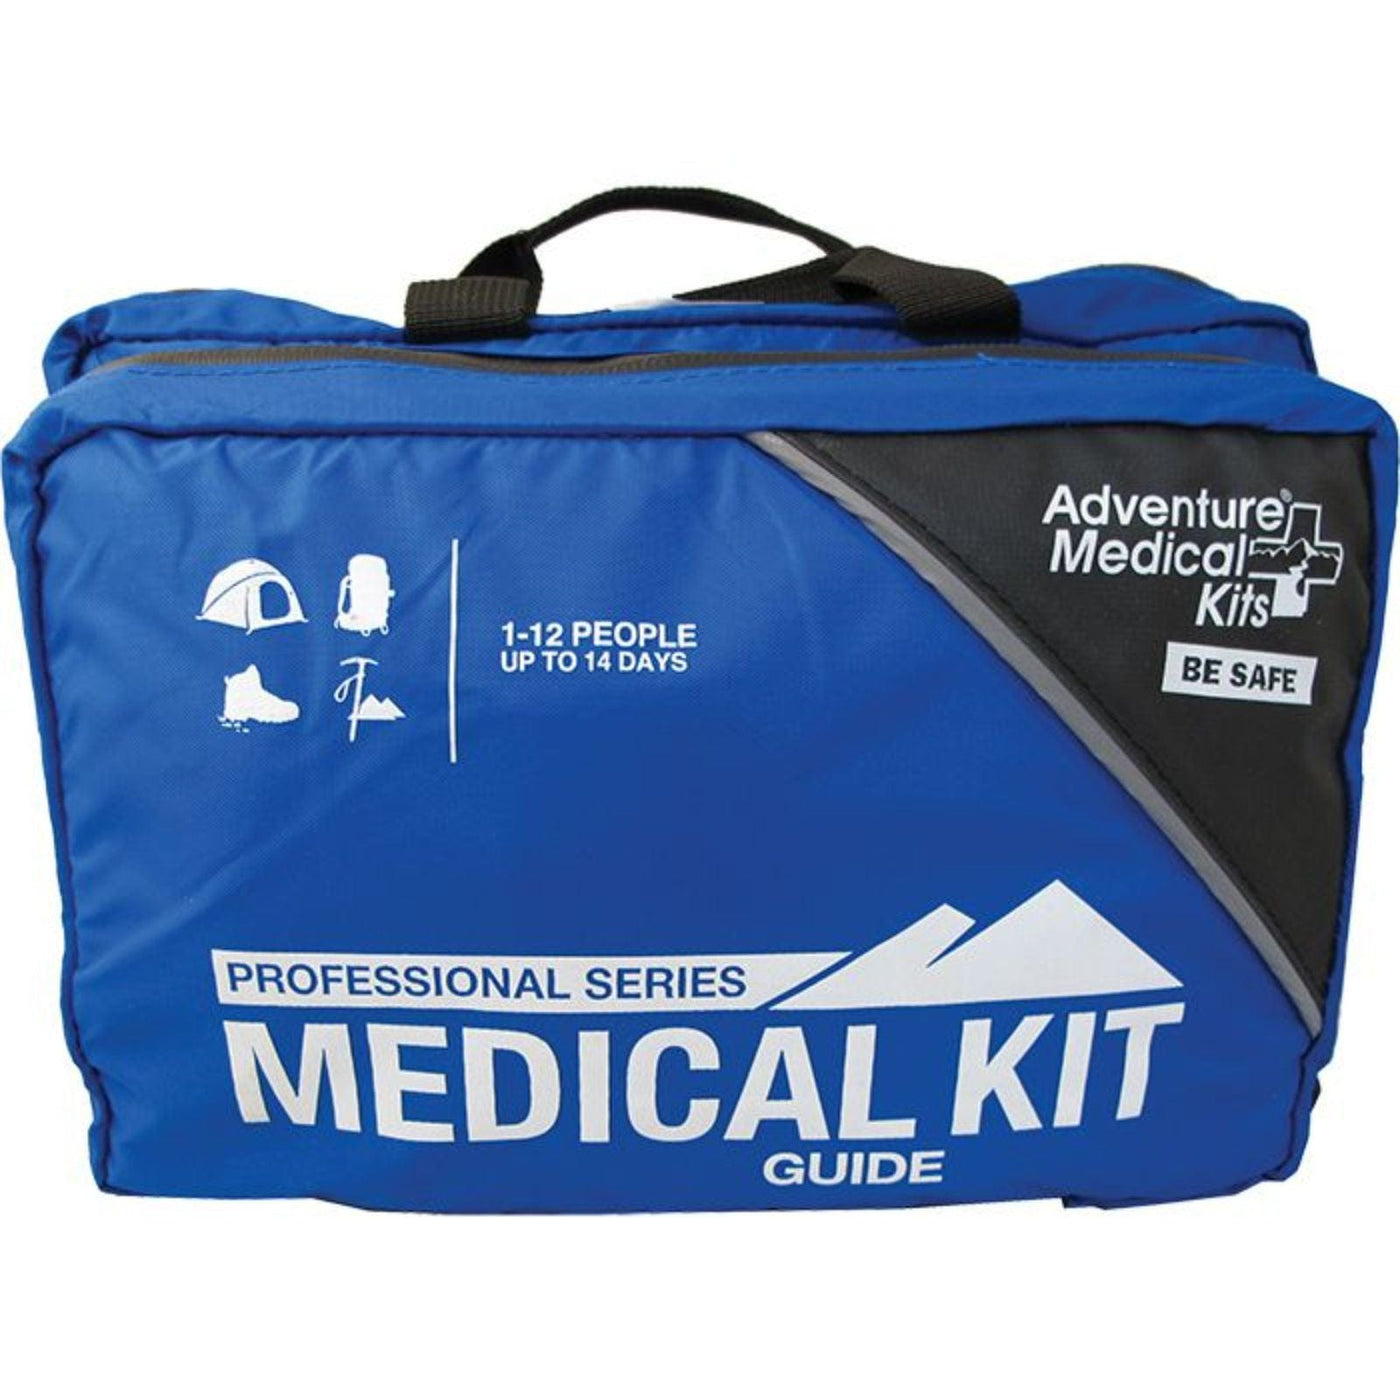 Adventure Medical Kits Adventure Medical Kits Professional Guide l Camping And Outdoor